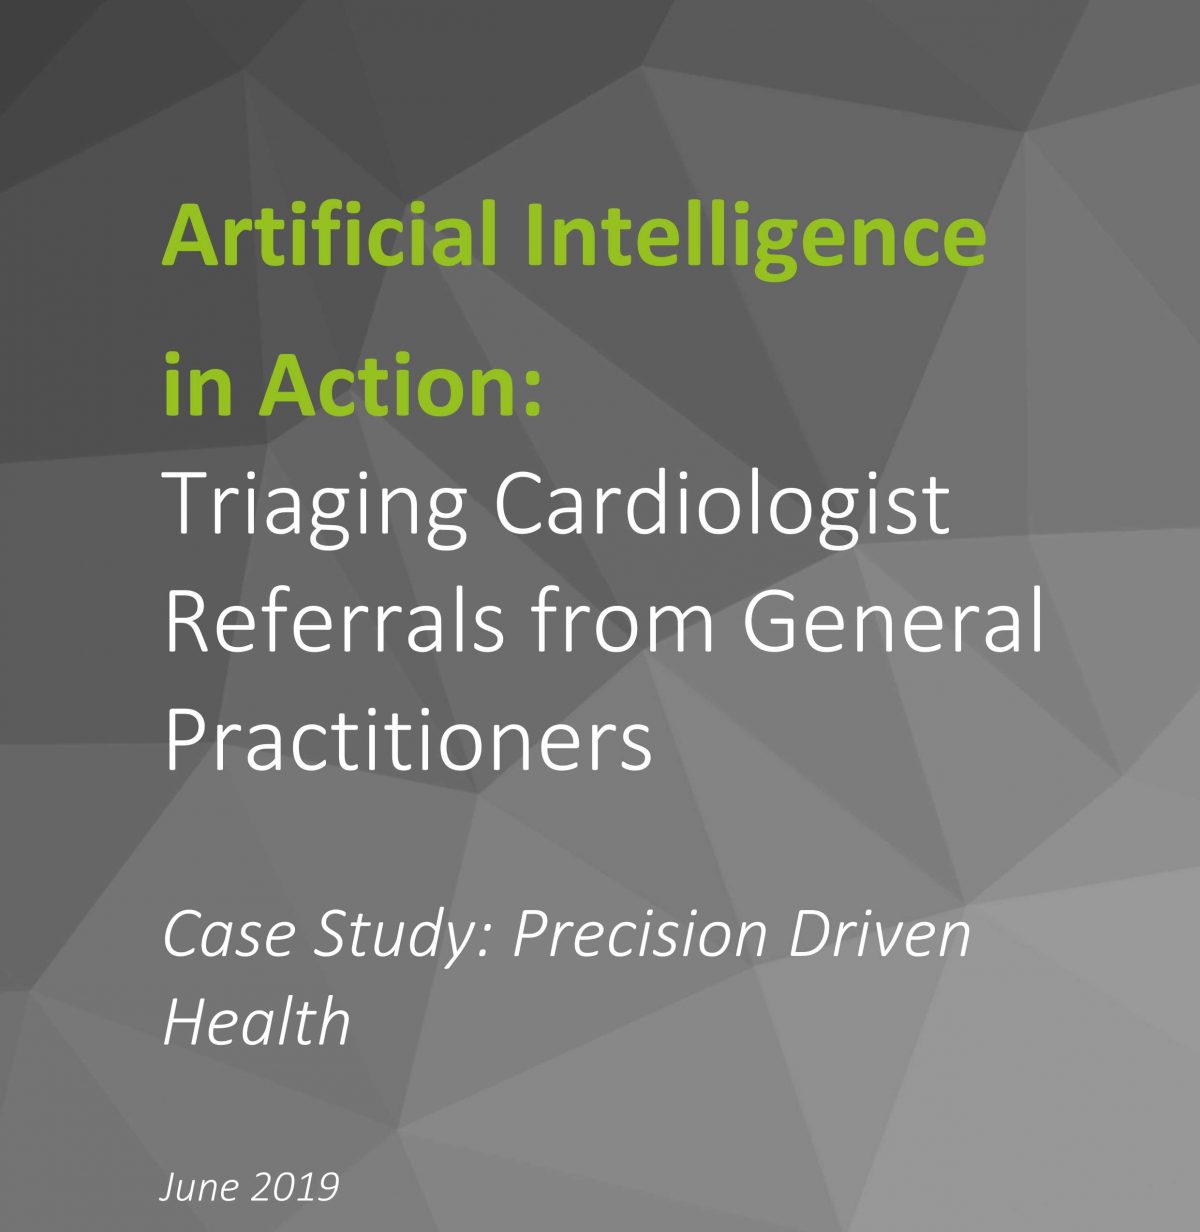 Artificial Intelligence in Action: Triaging Cardiologist Referrals from General Practitioners